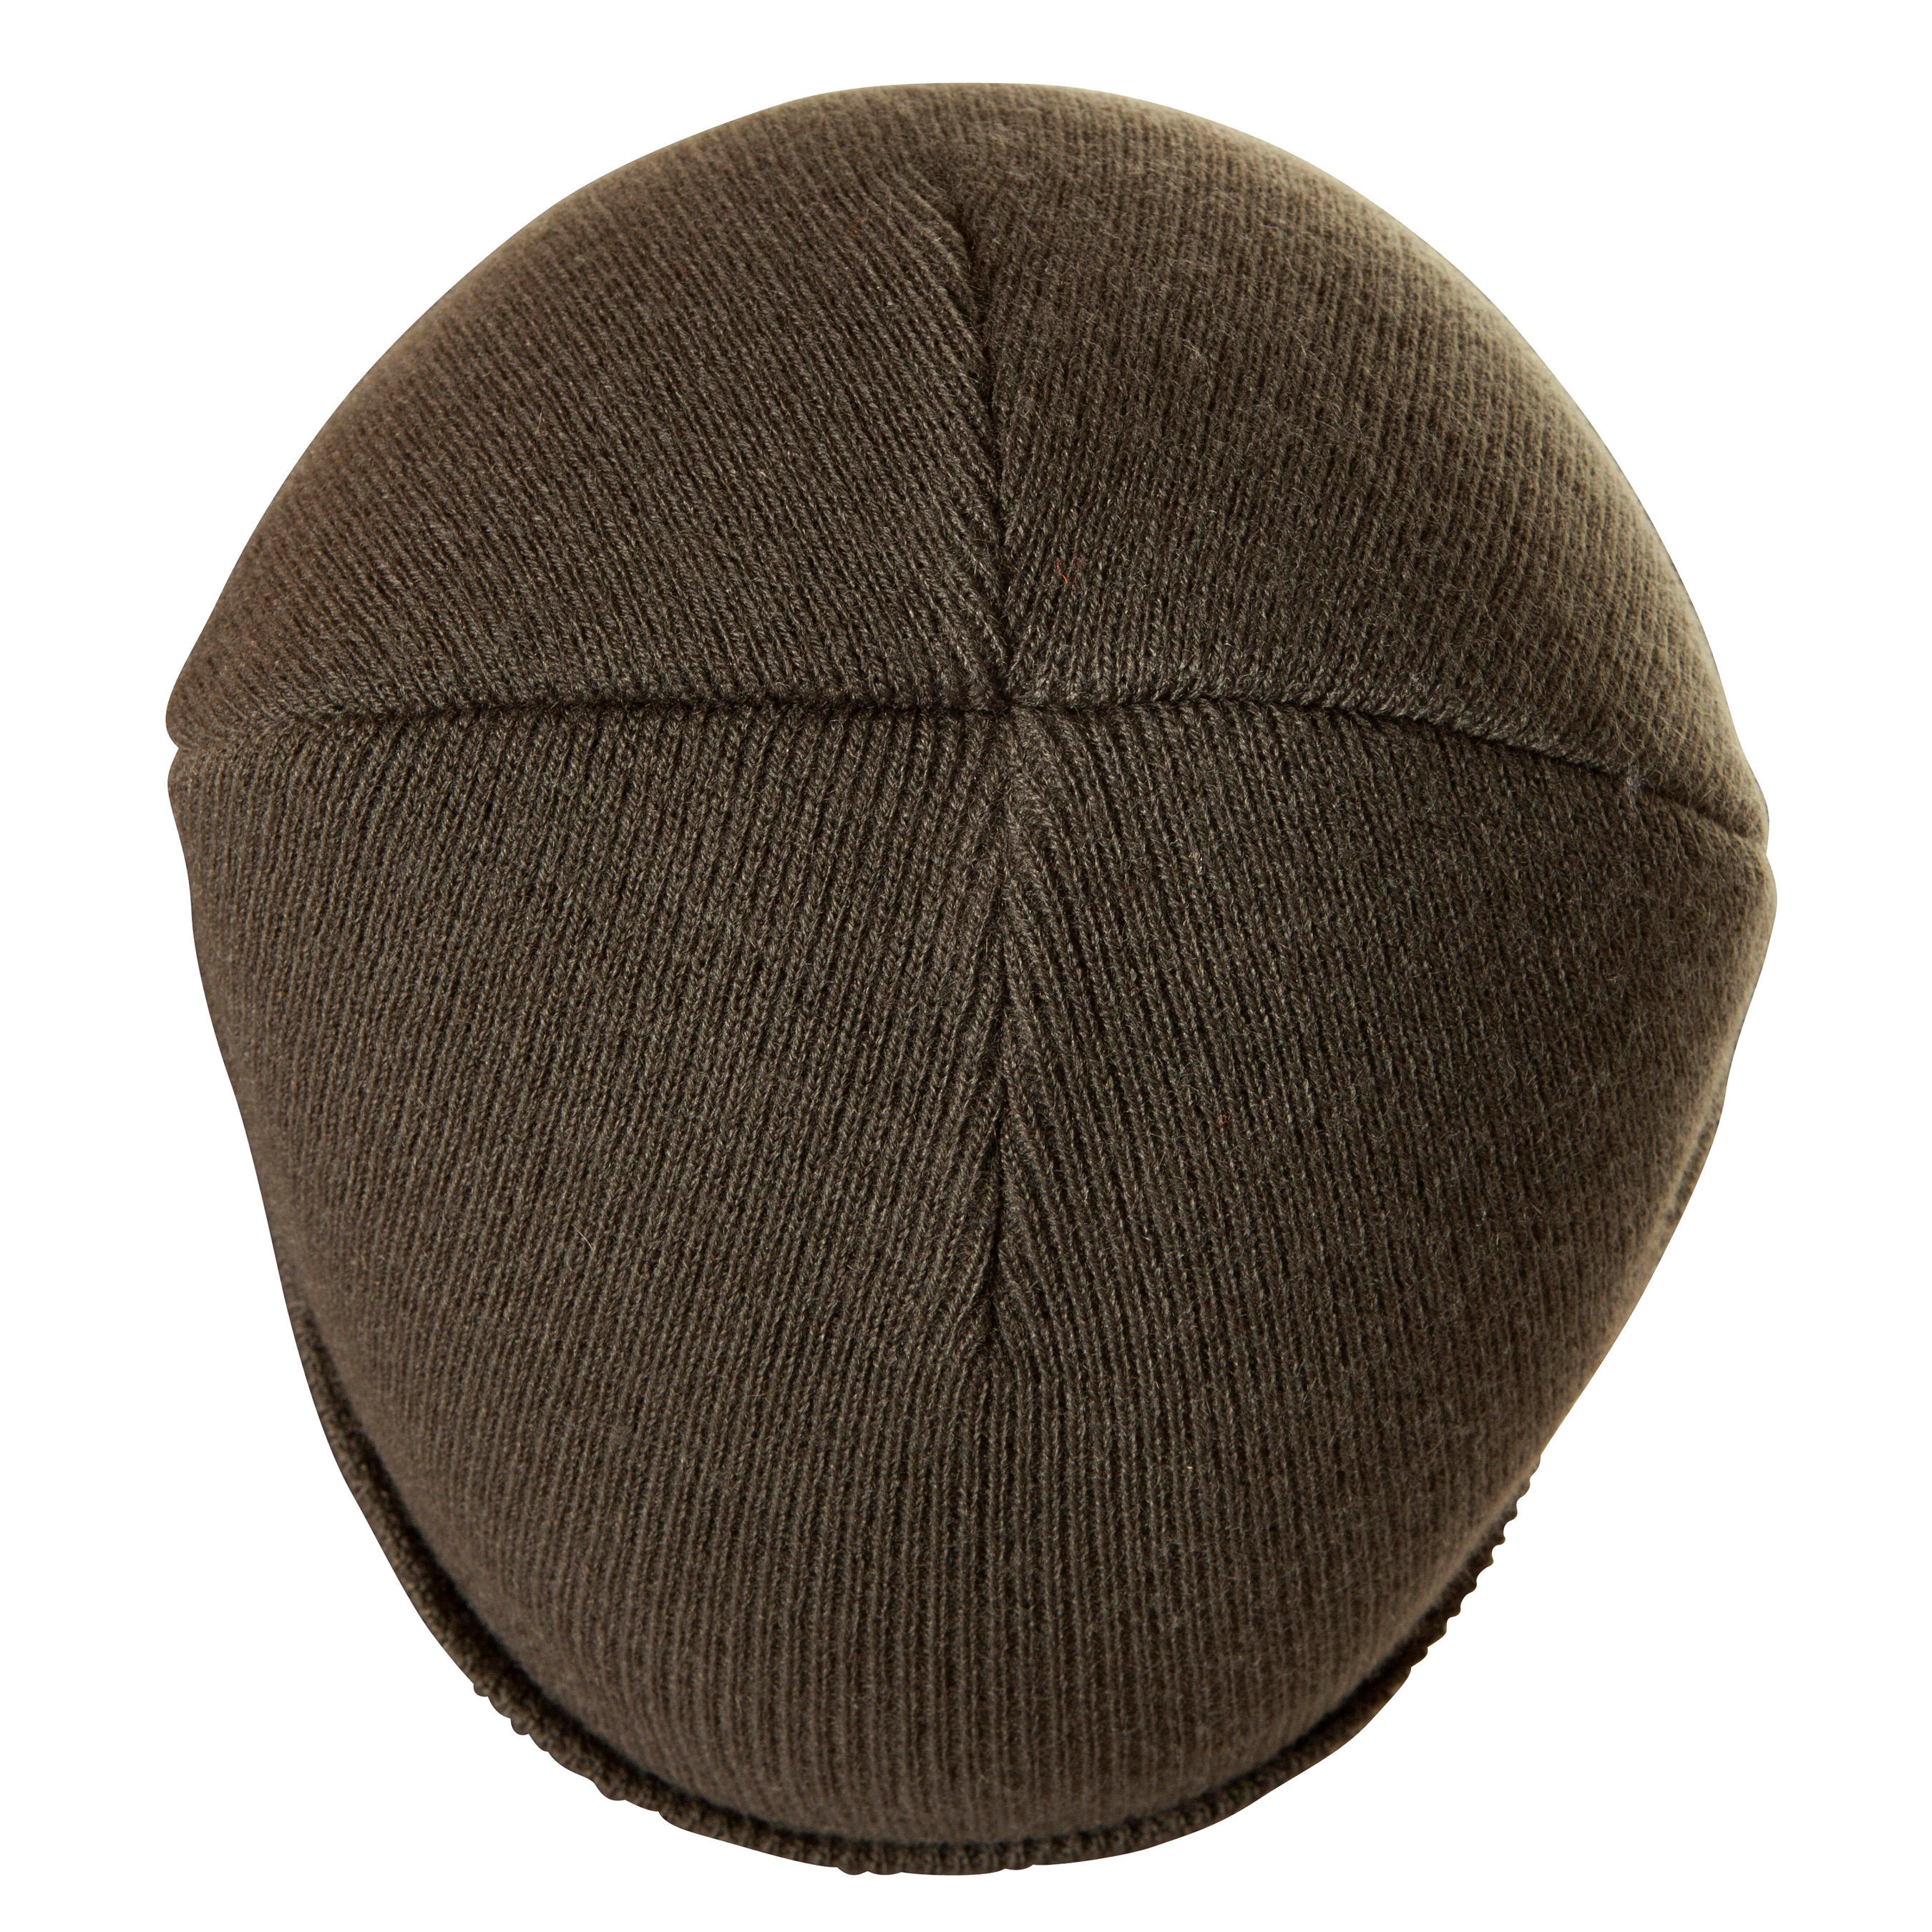 Warm Knitted Hat - Brown 2/4